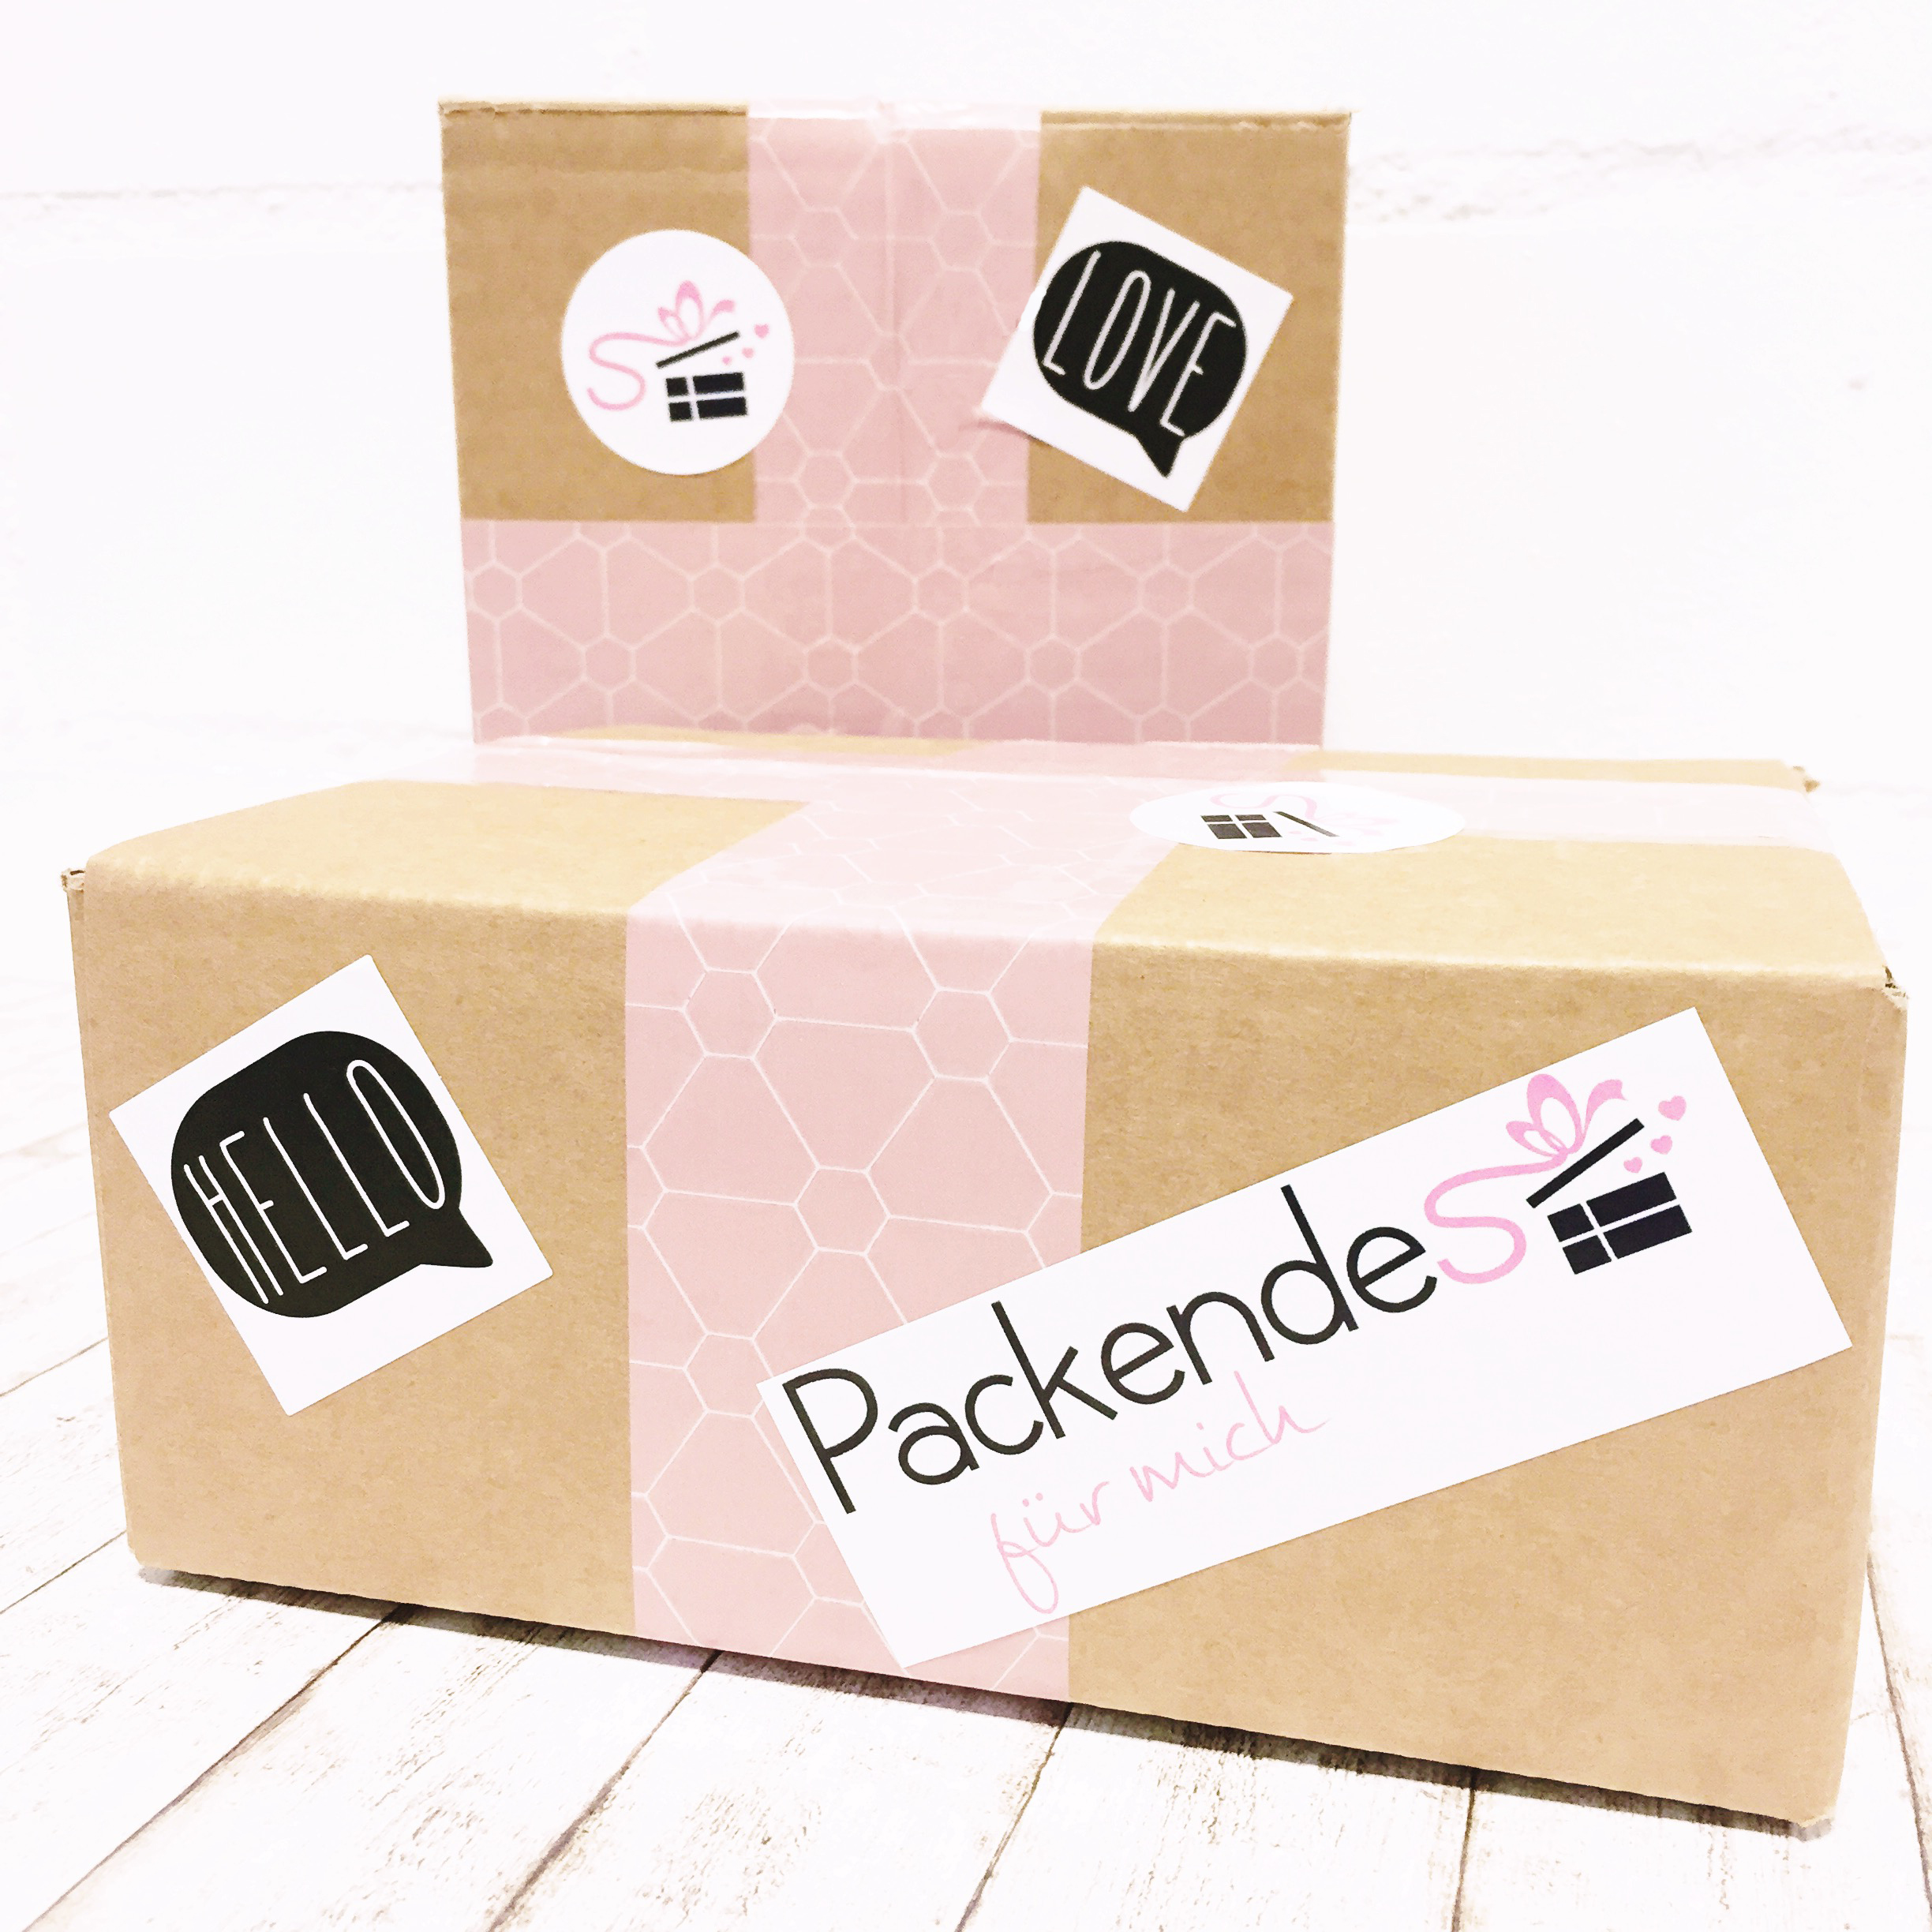 Packendes